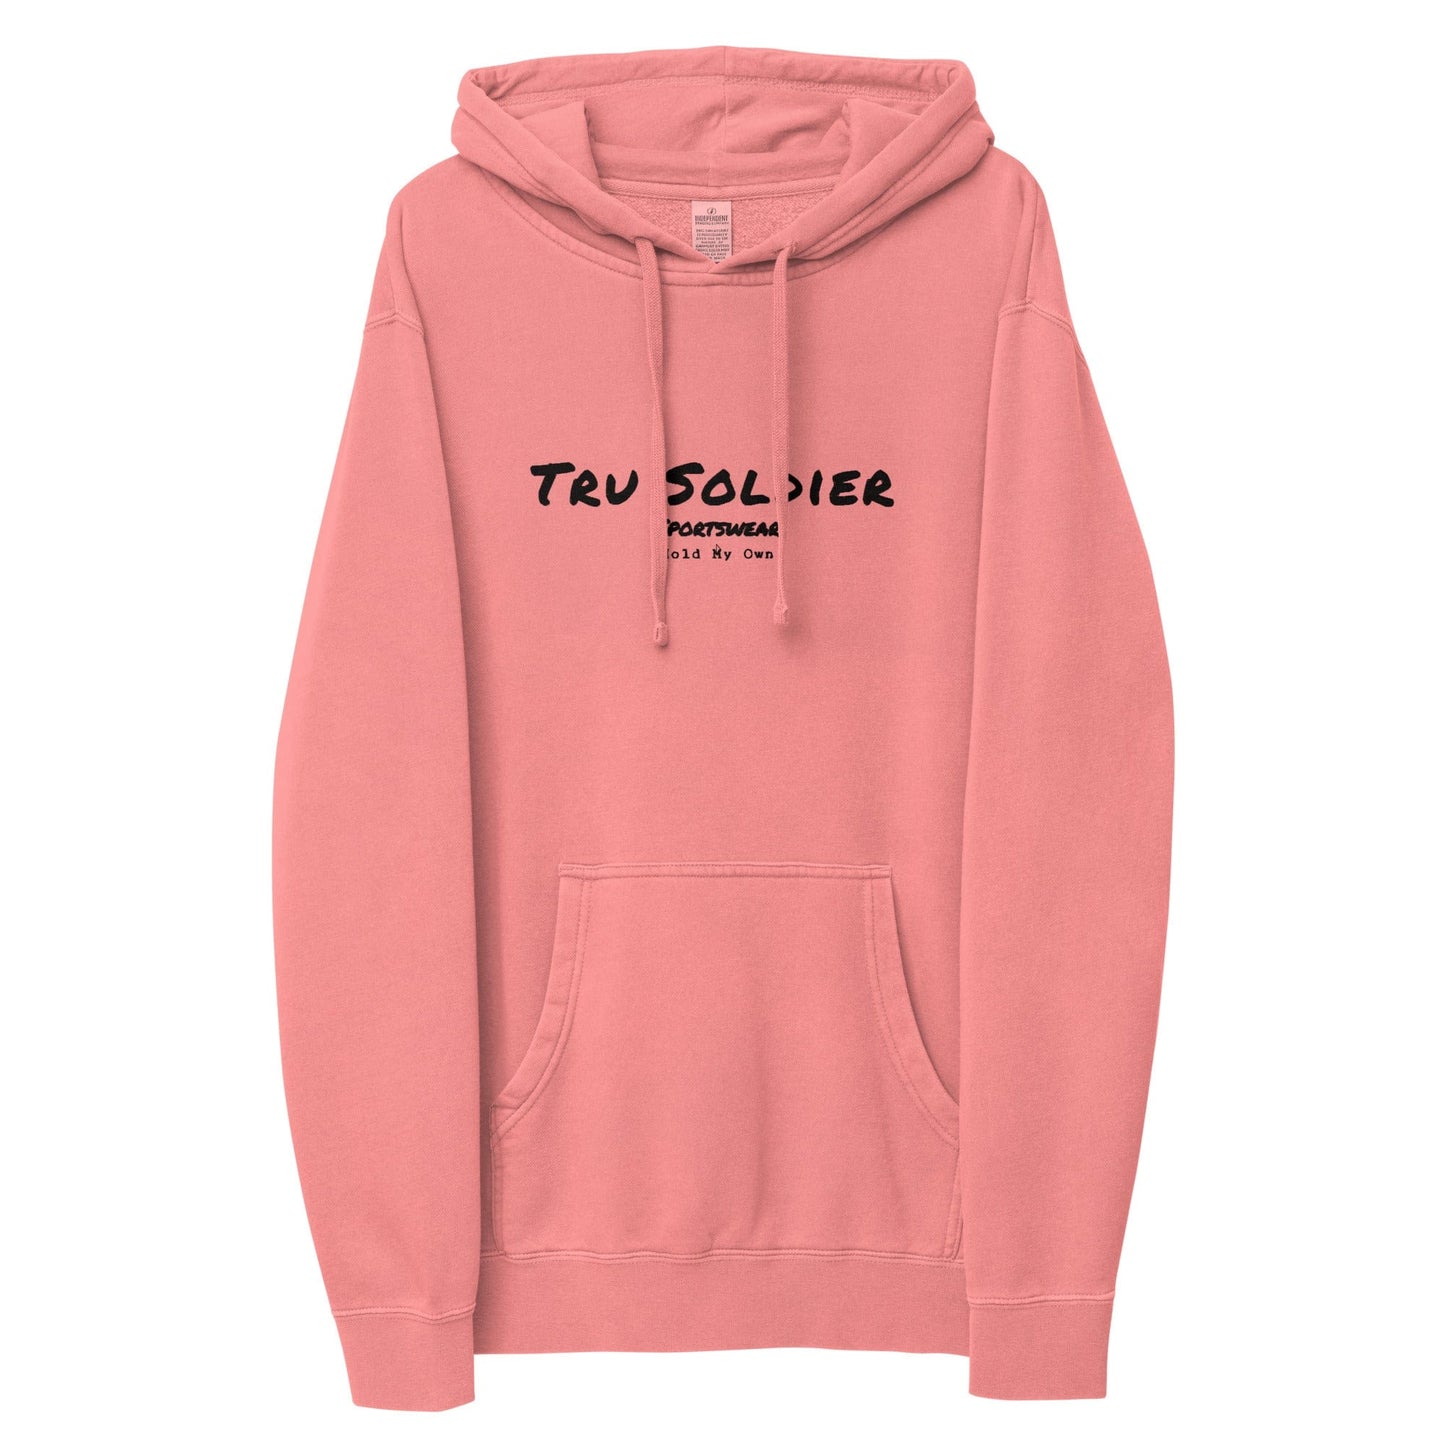 Tru Soldier Sportswear  Pigment Pink / S Signature embroidered Unisex pigment-dyed hoodie